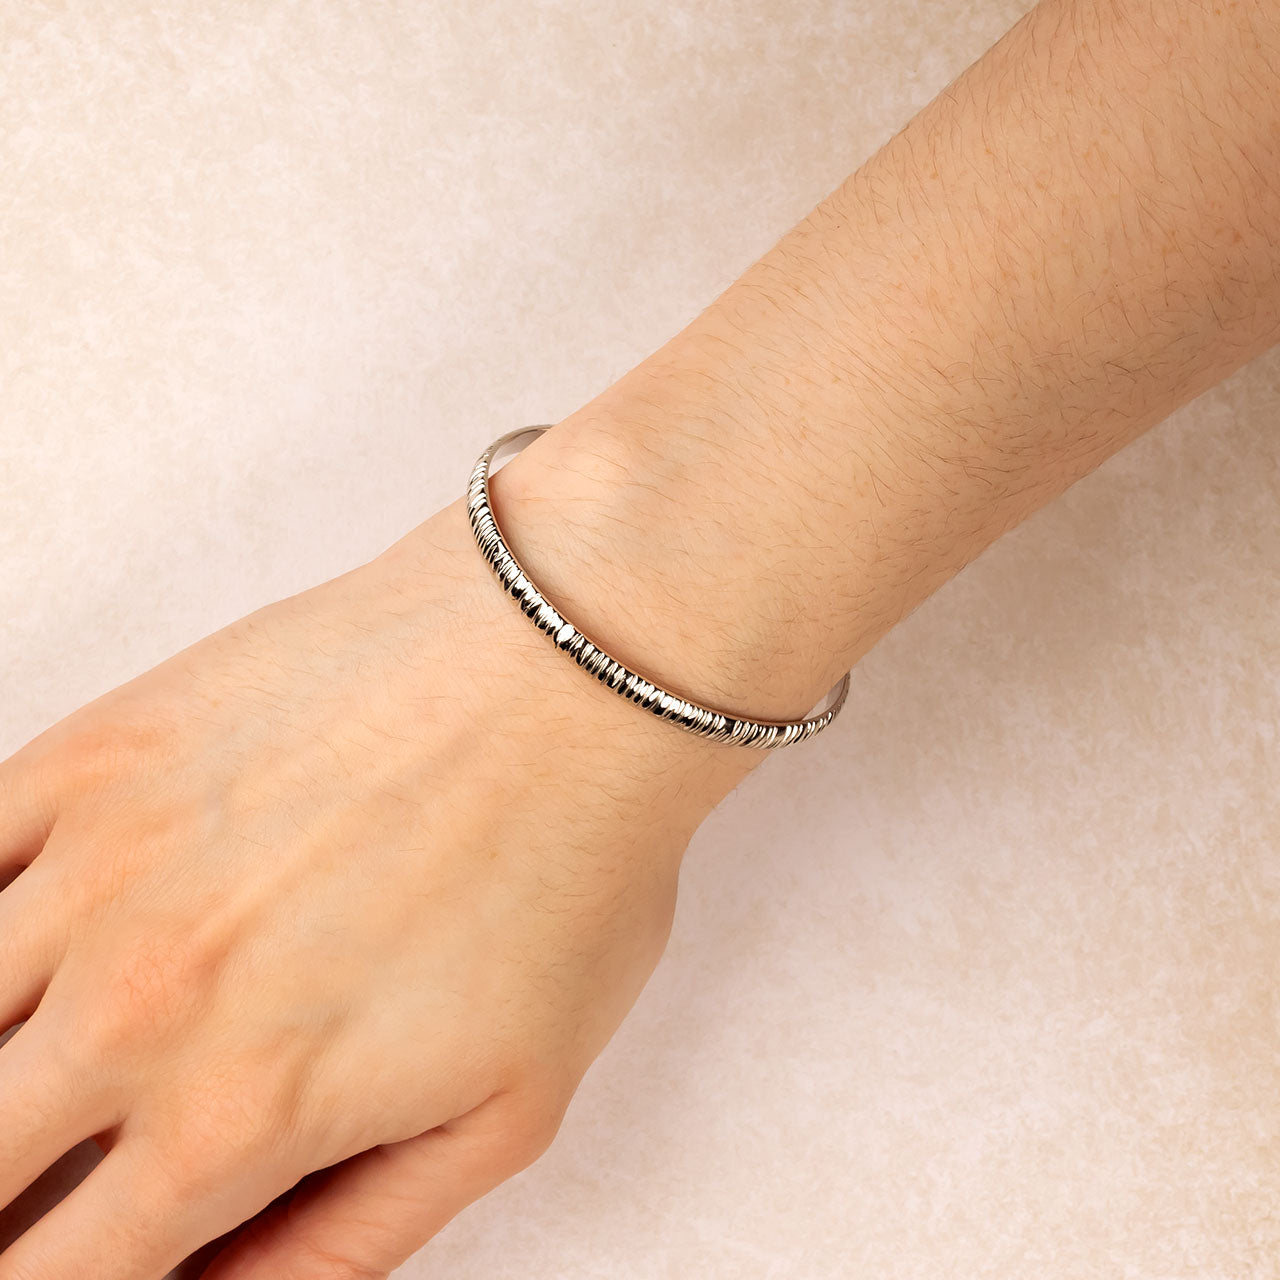 Sterling Silver Grooved Elements Bangle